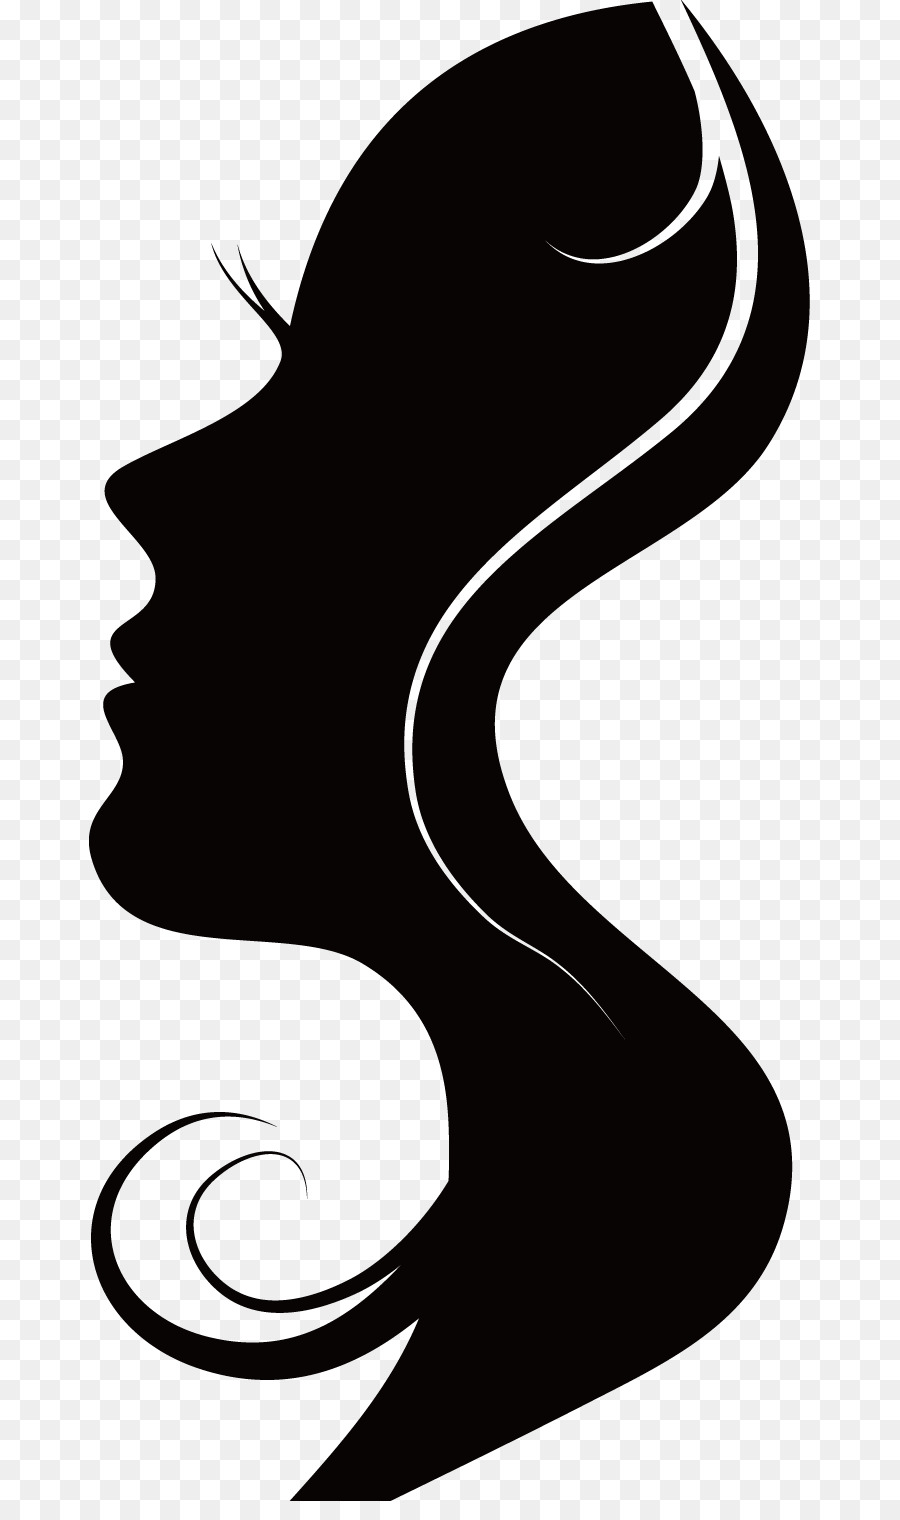 Silhouette Woman - Woman silhouettes png download - 721*1501 - Free Transparent Silhouette png Download.